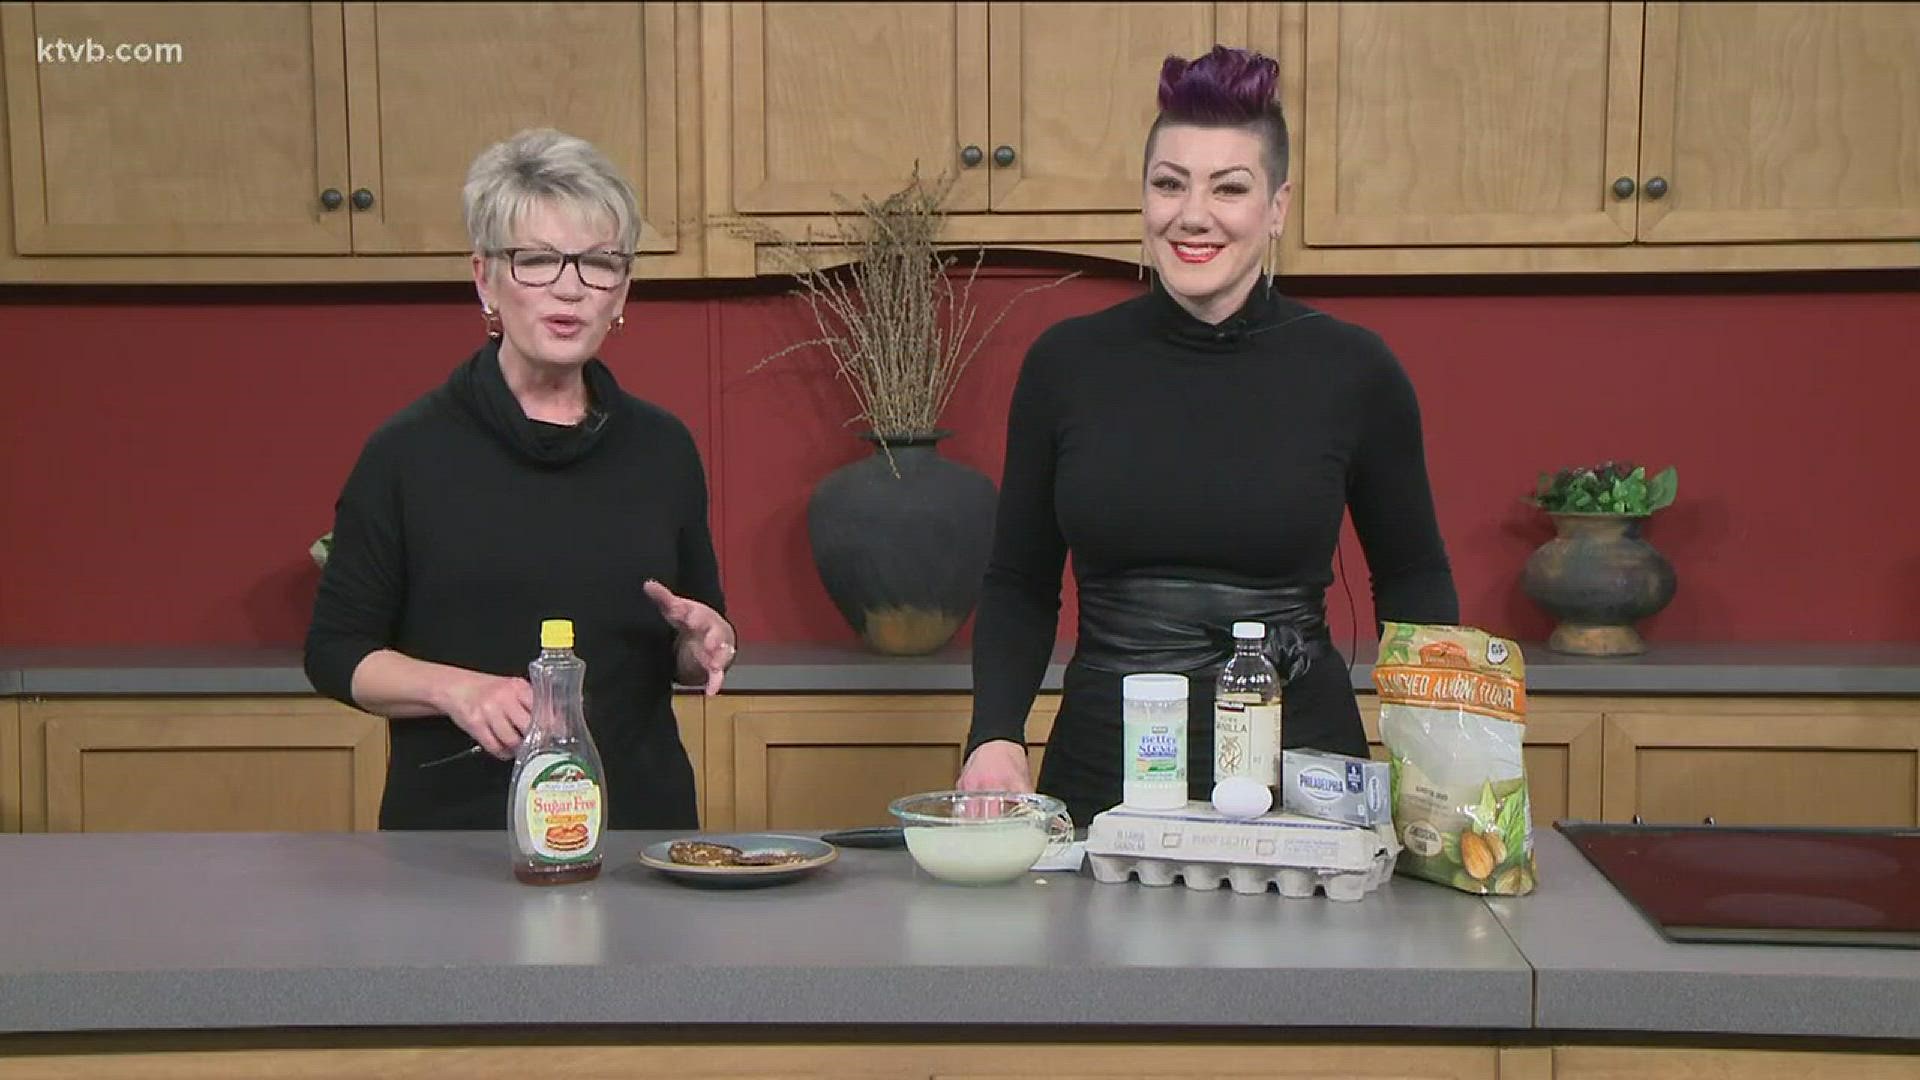 Christy Nickel shows us how to make carb-less crapes.